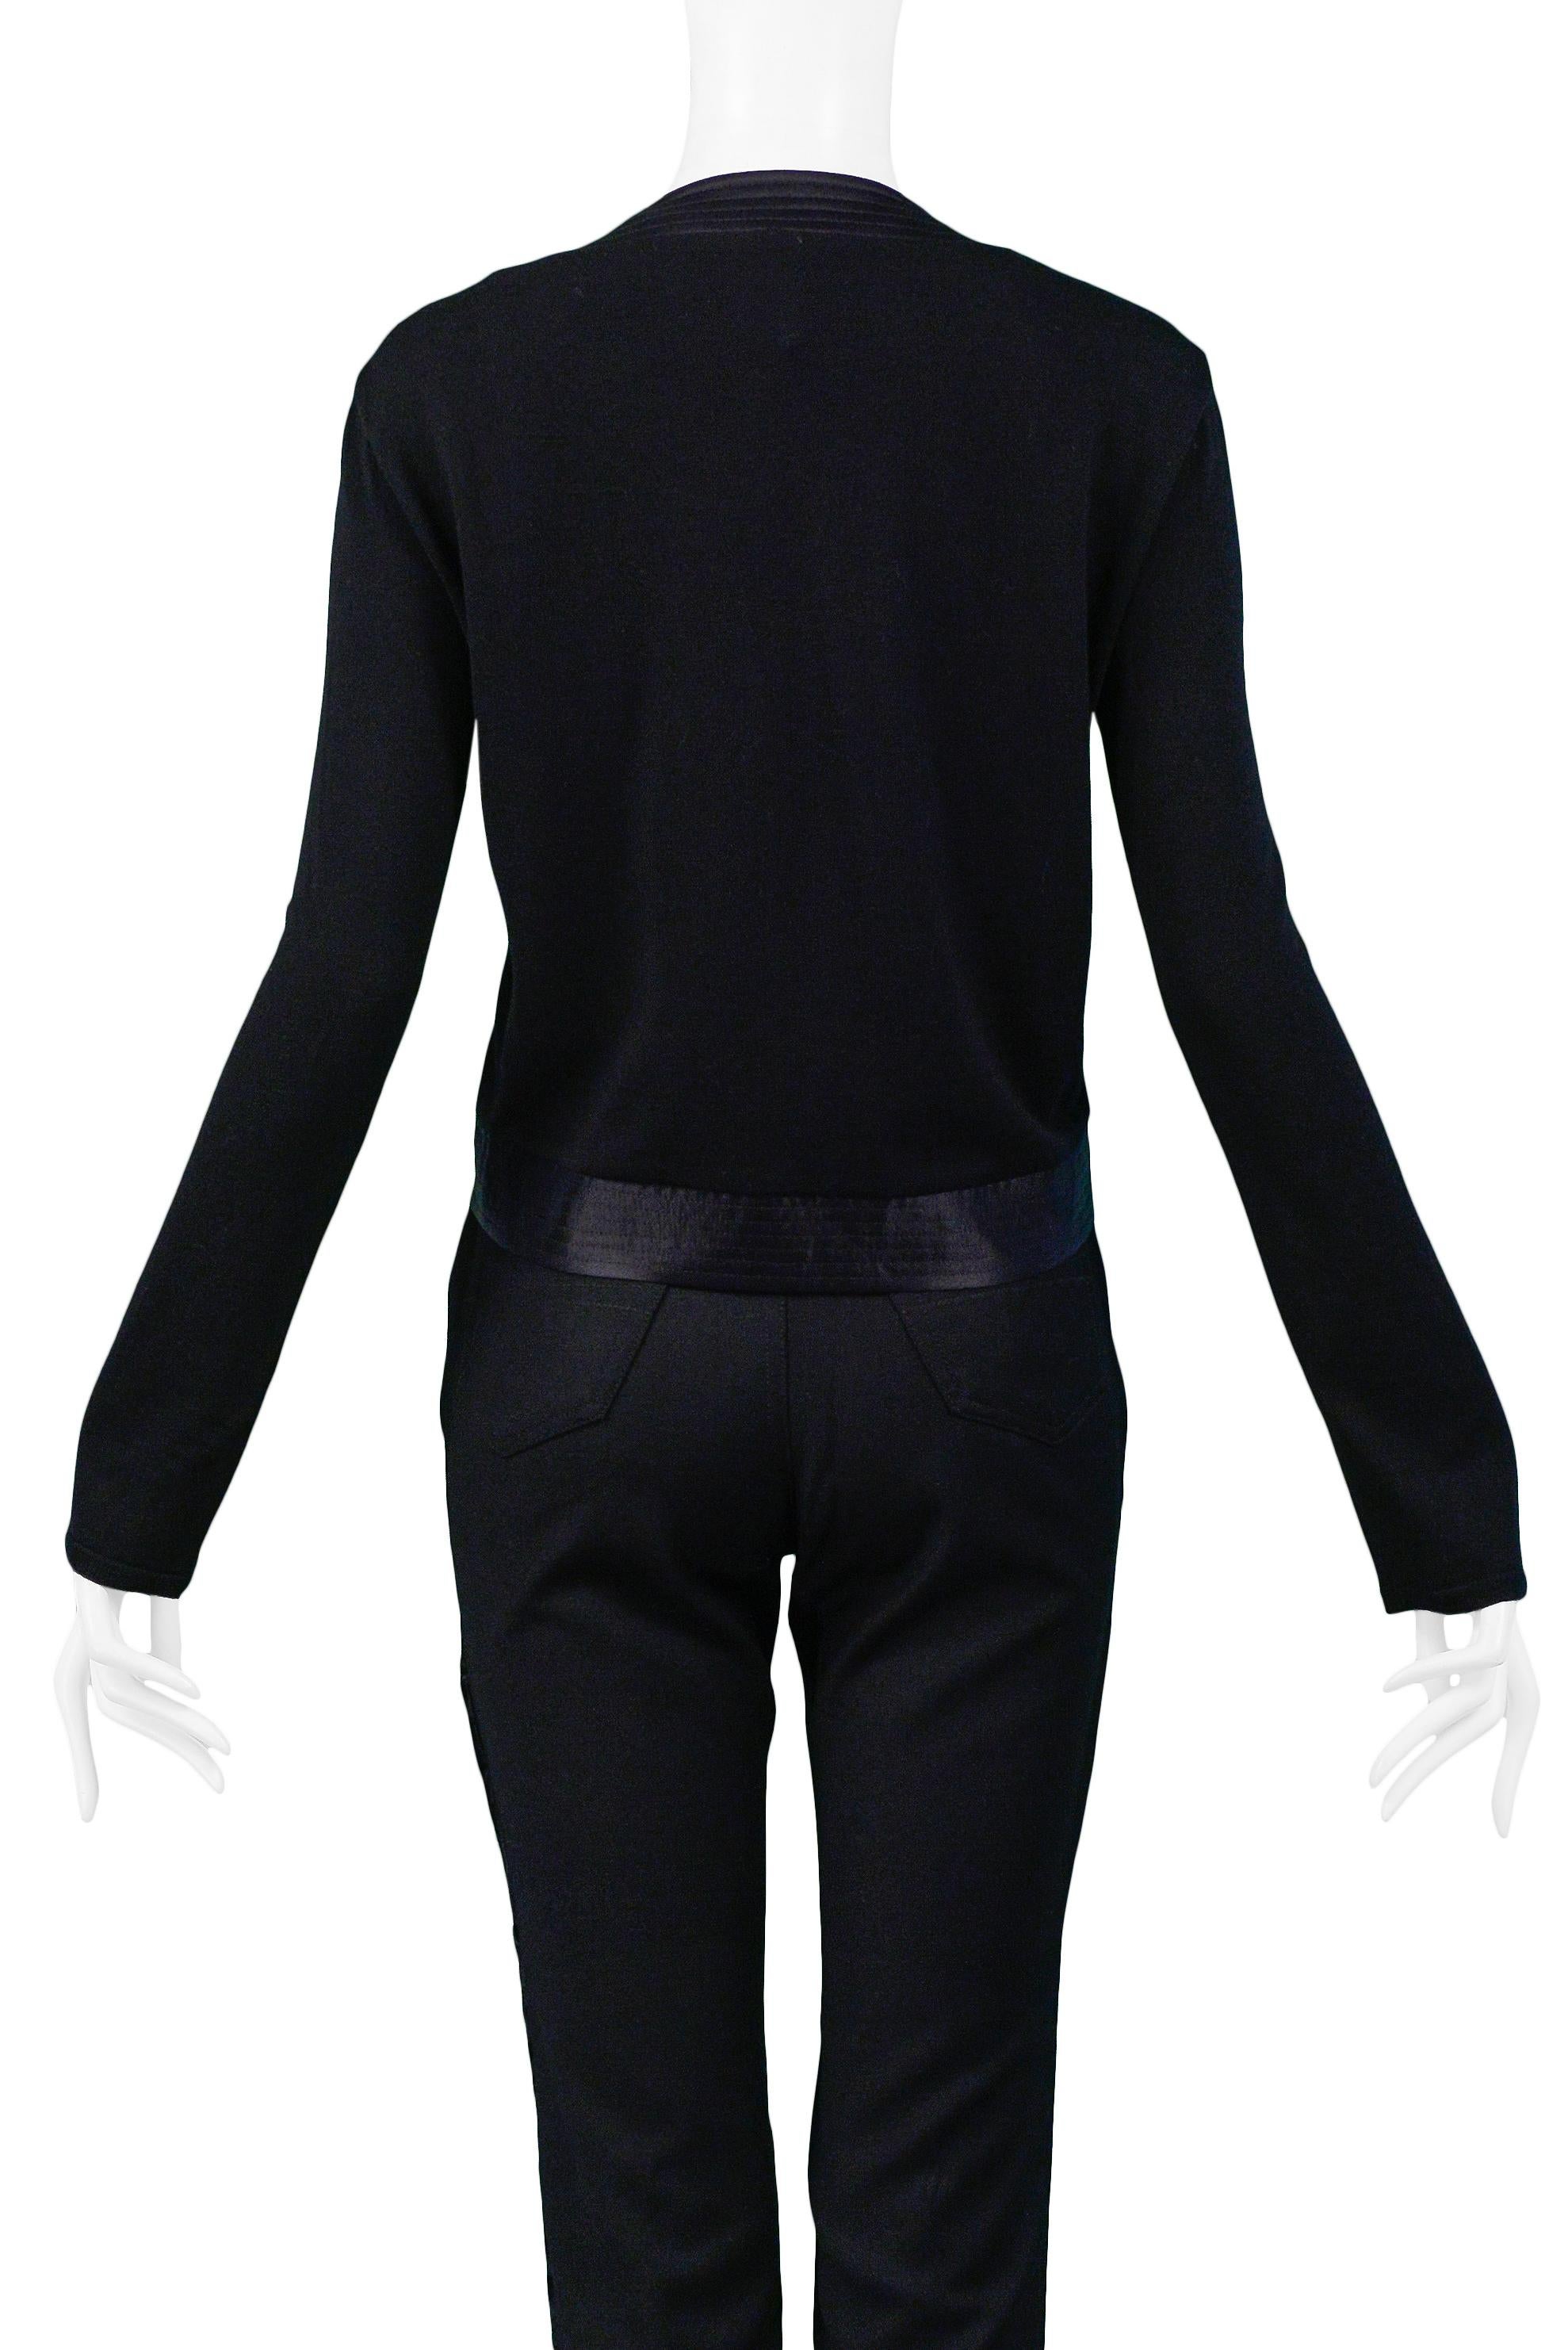 Gianfranco Ferre Black Fur Textured Twin Set Cardigan, Shell Sweater and Pants  For Sale 4